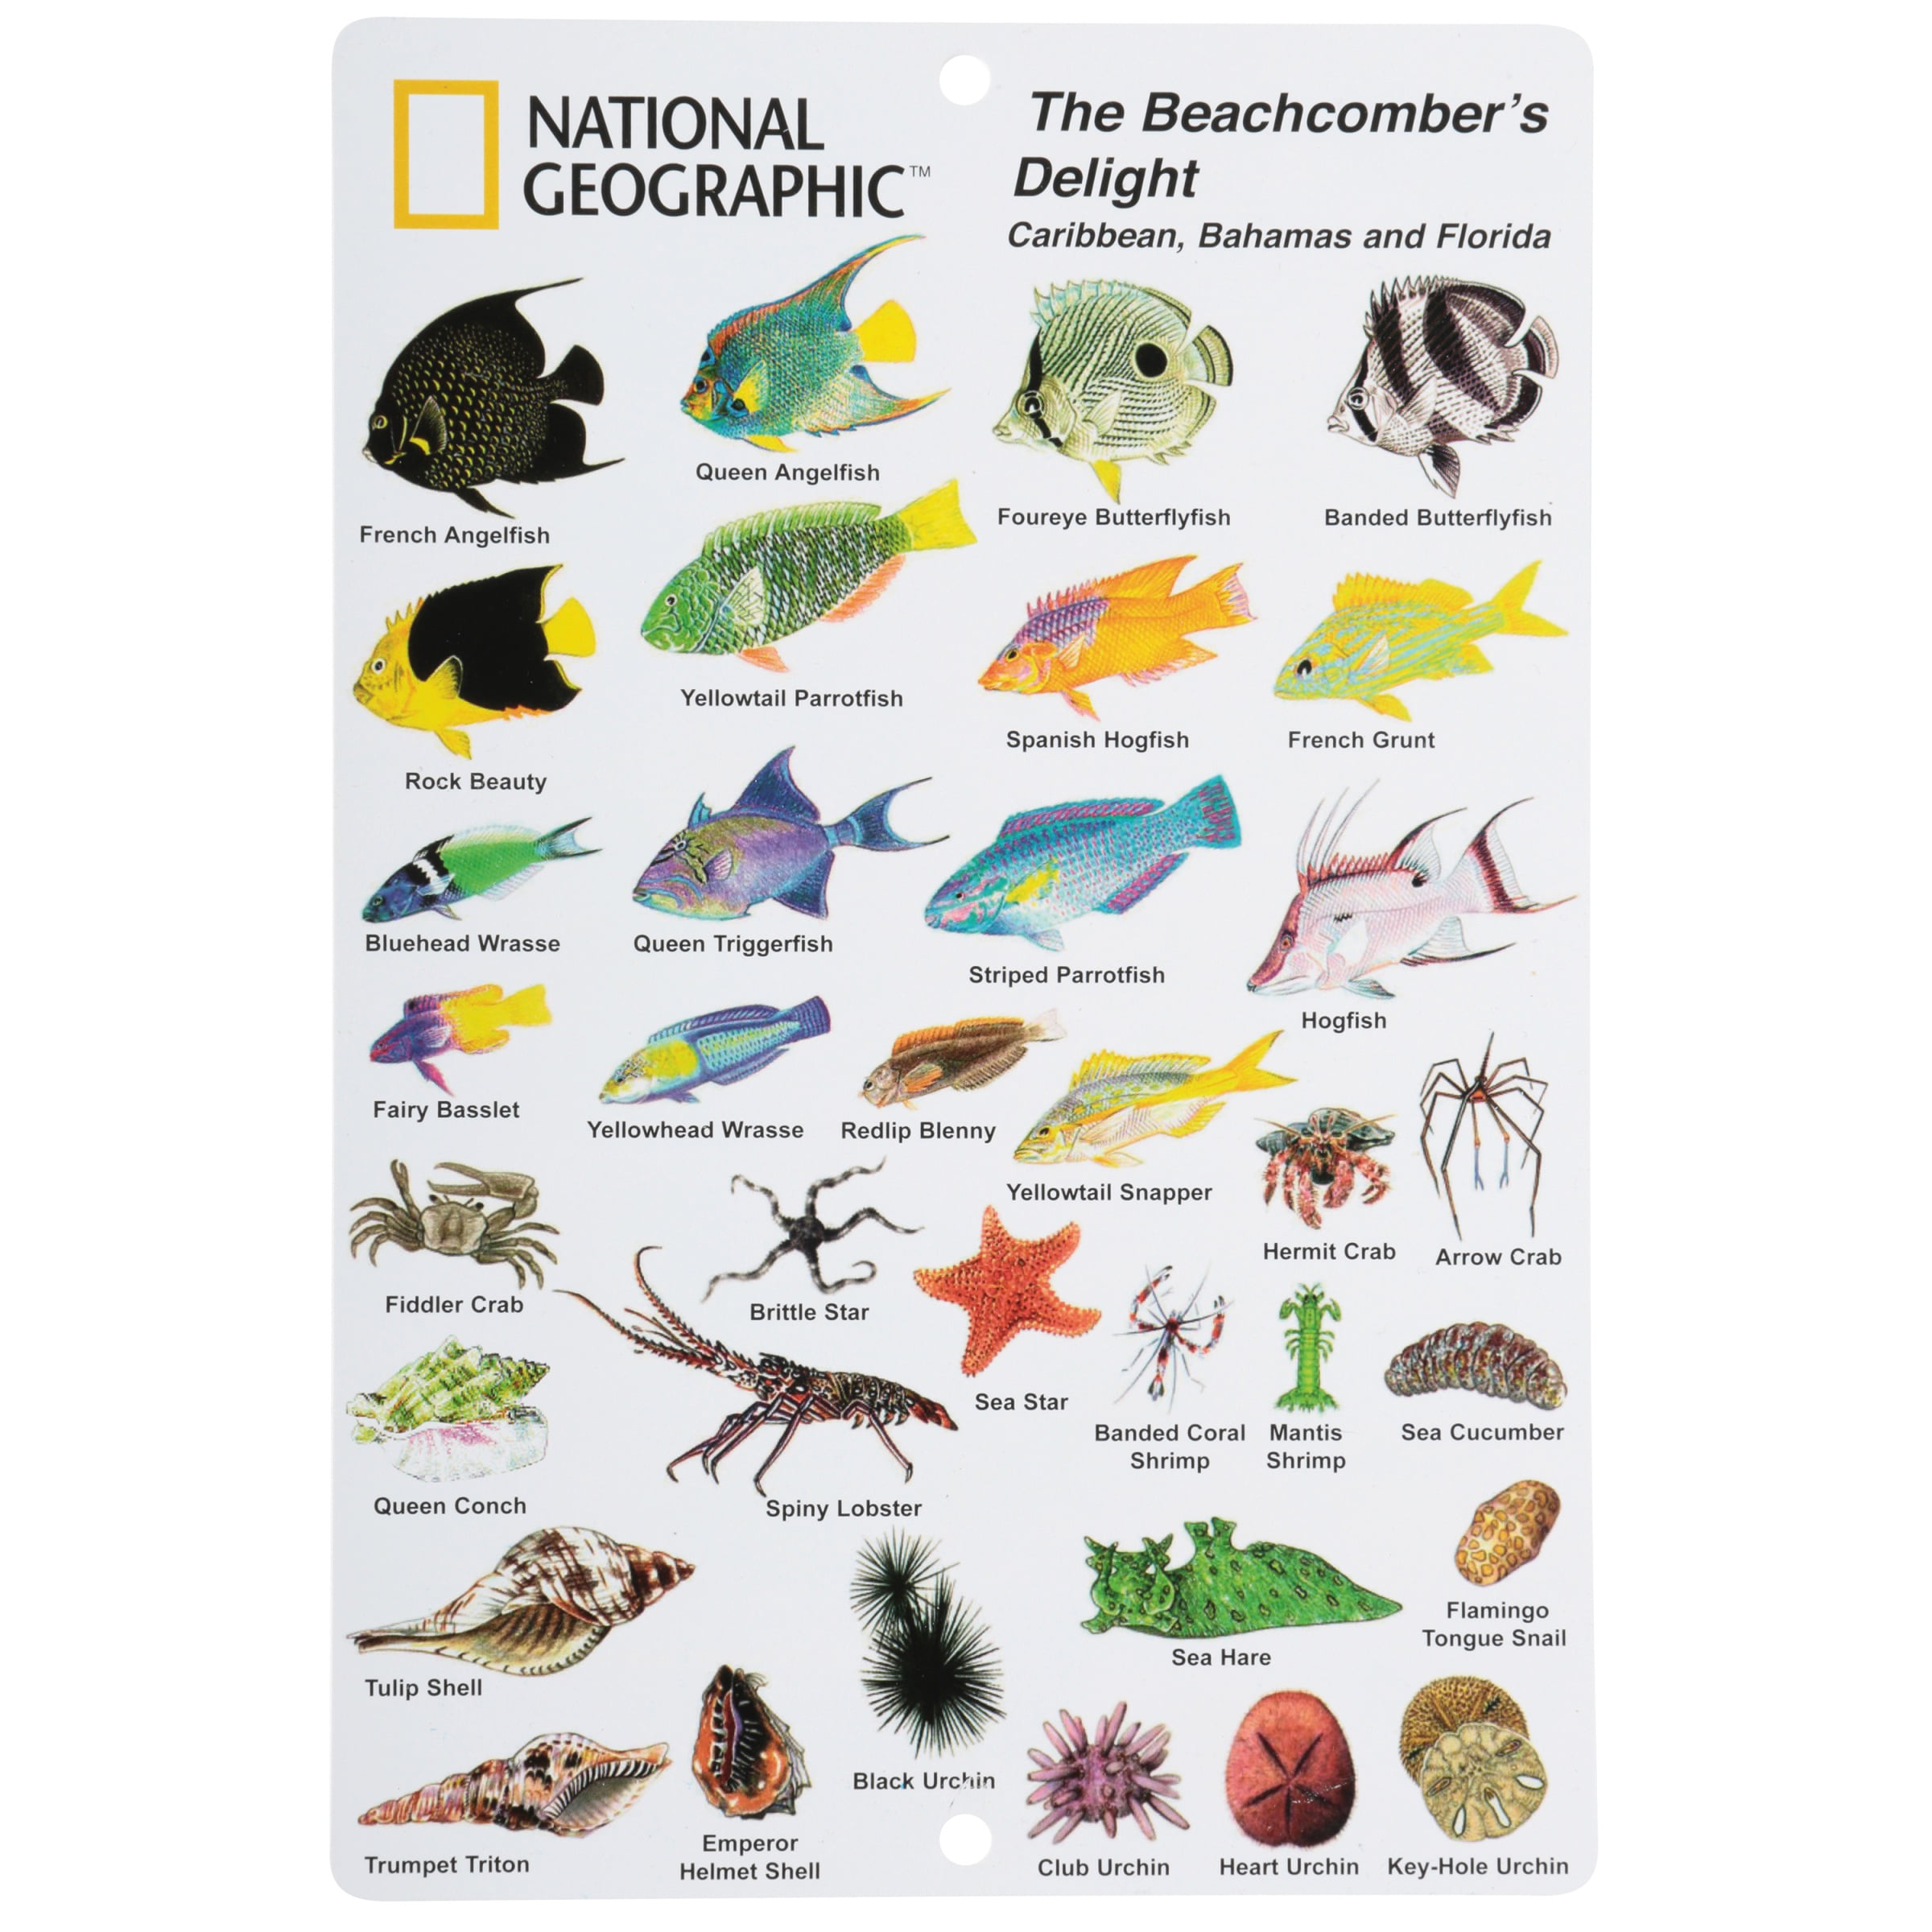 National Geographic™ The Beachcomber's Delight Caribbean, Bahamas and ...